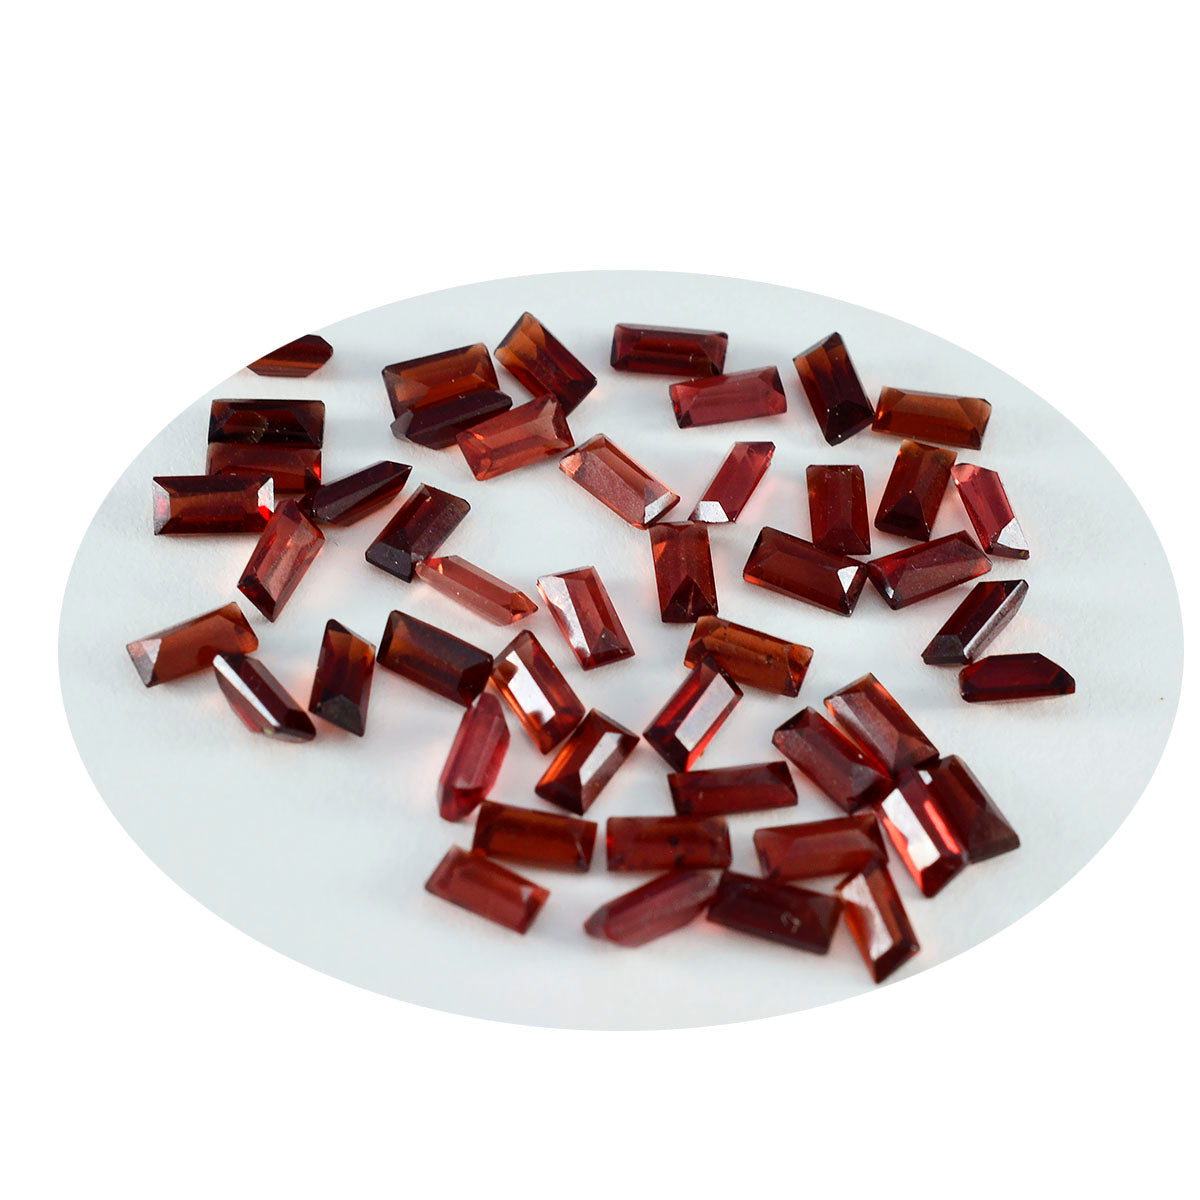 Riyogems 1PC Real Red Garnet Faceted 2x4 mm  Baguette Shape awesome Quality Gemstone